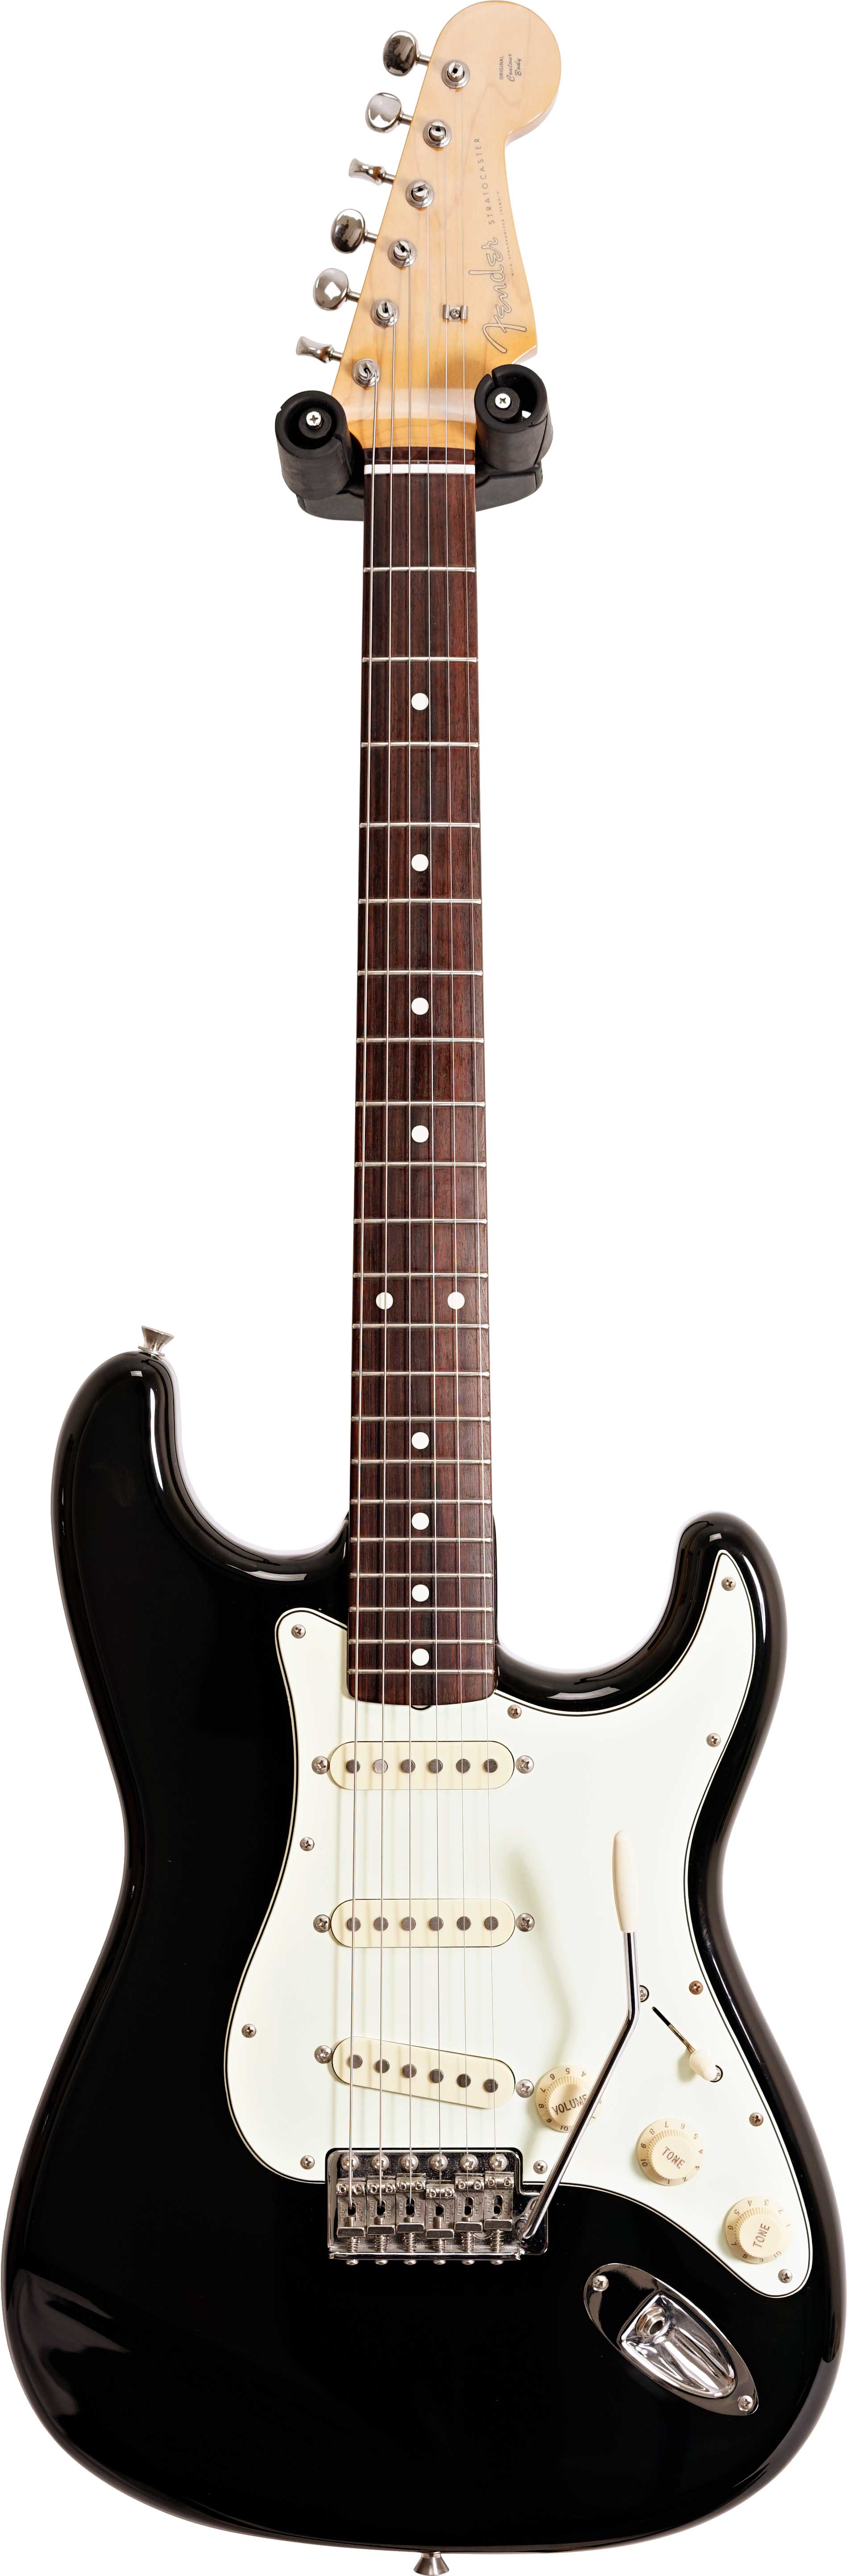 Fender Stratocaster Crafted In Japan ST-62 Black Rosewood Fingerboard  (Pre-Owned) #A027891